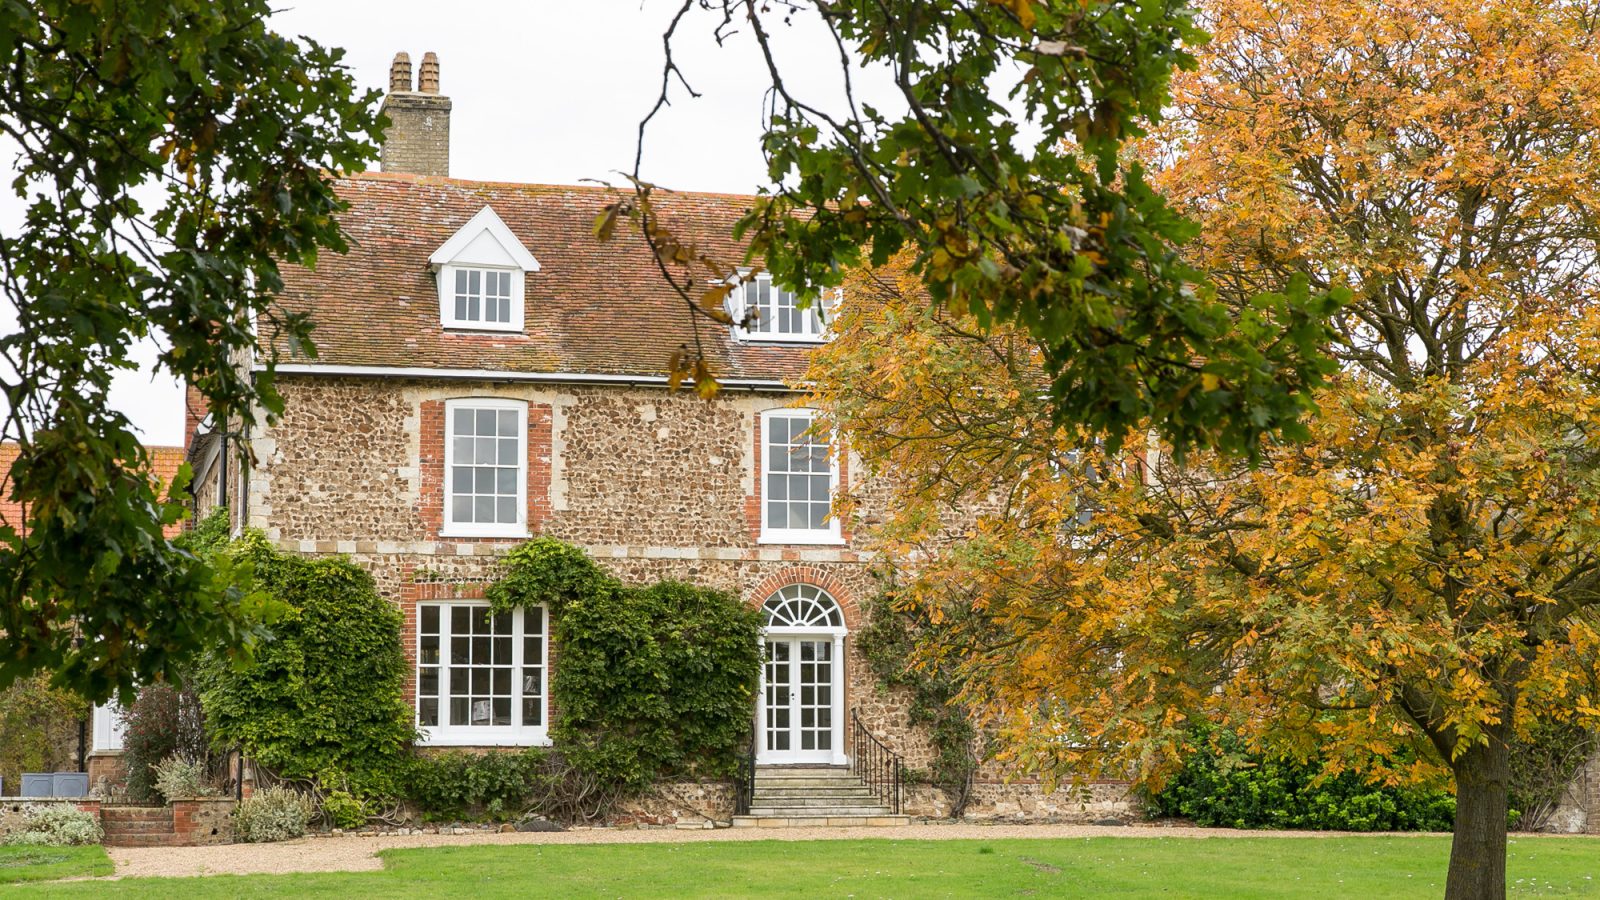  Butley Abbey Farmhouse - kate & tom's Large Holiday Homes